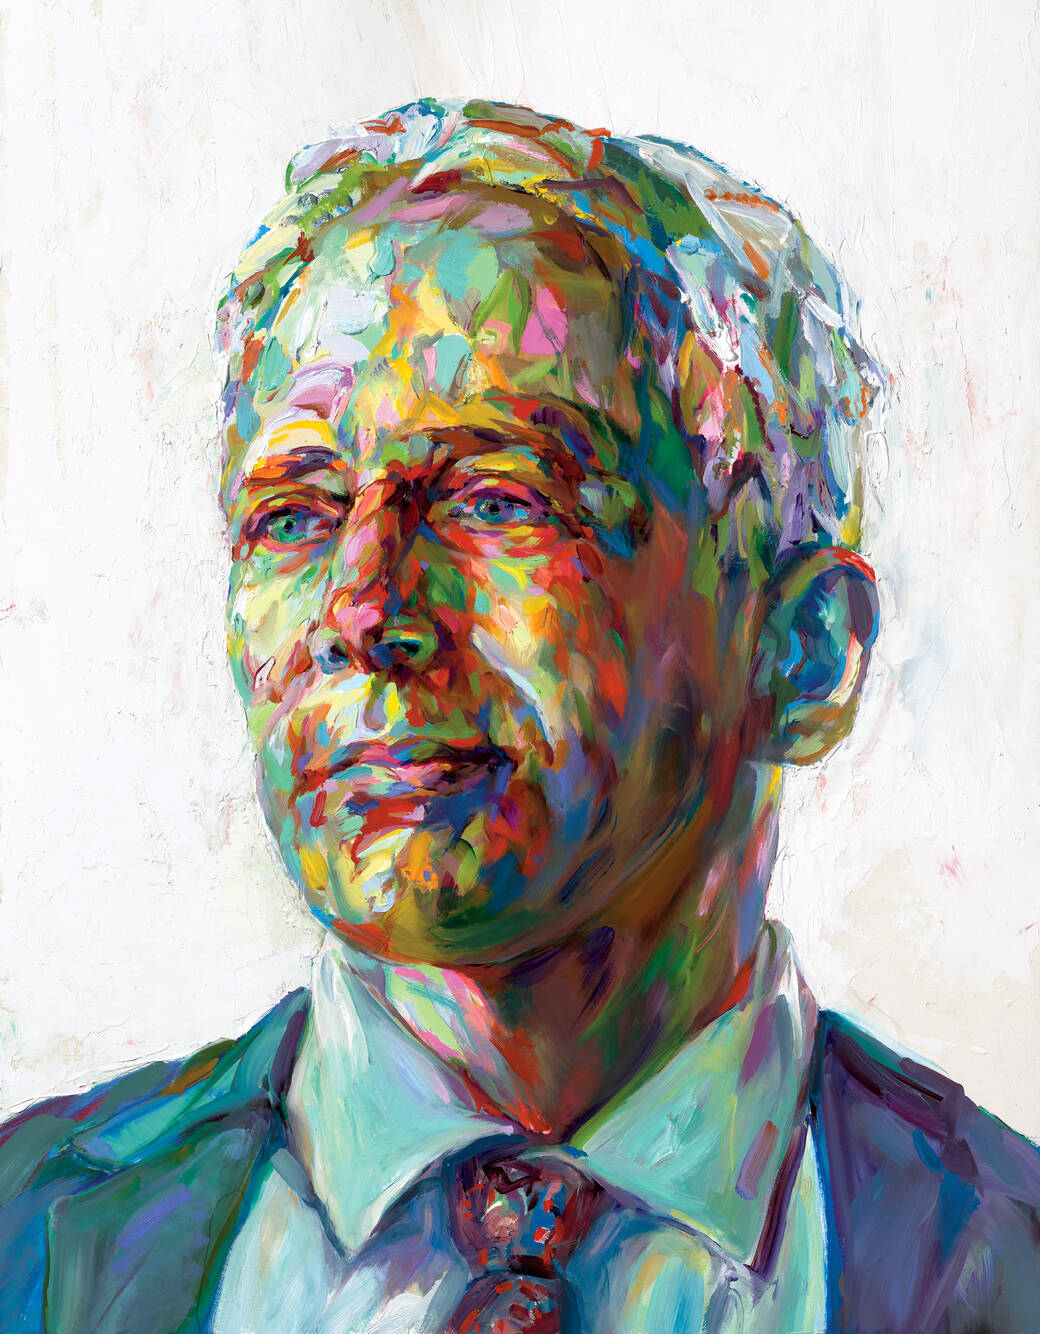 Colorful impasto portrait of a beardless Lorne M. Buchman, current president of ArtCenter College of Design